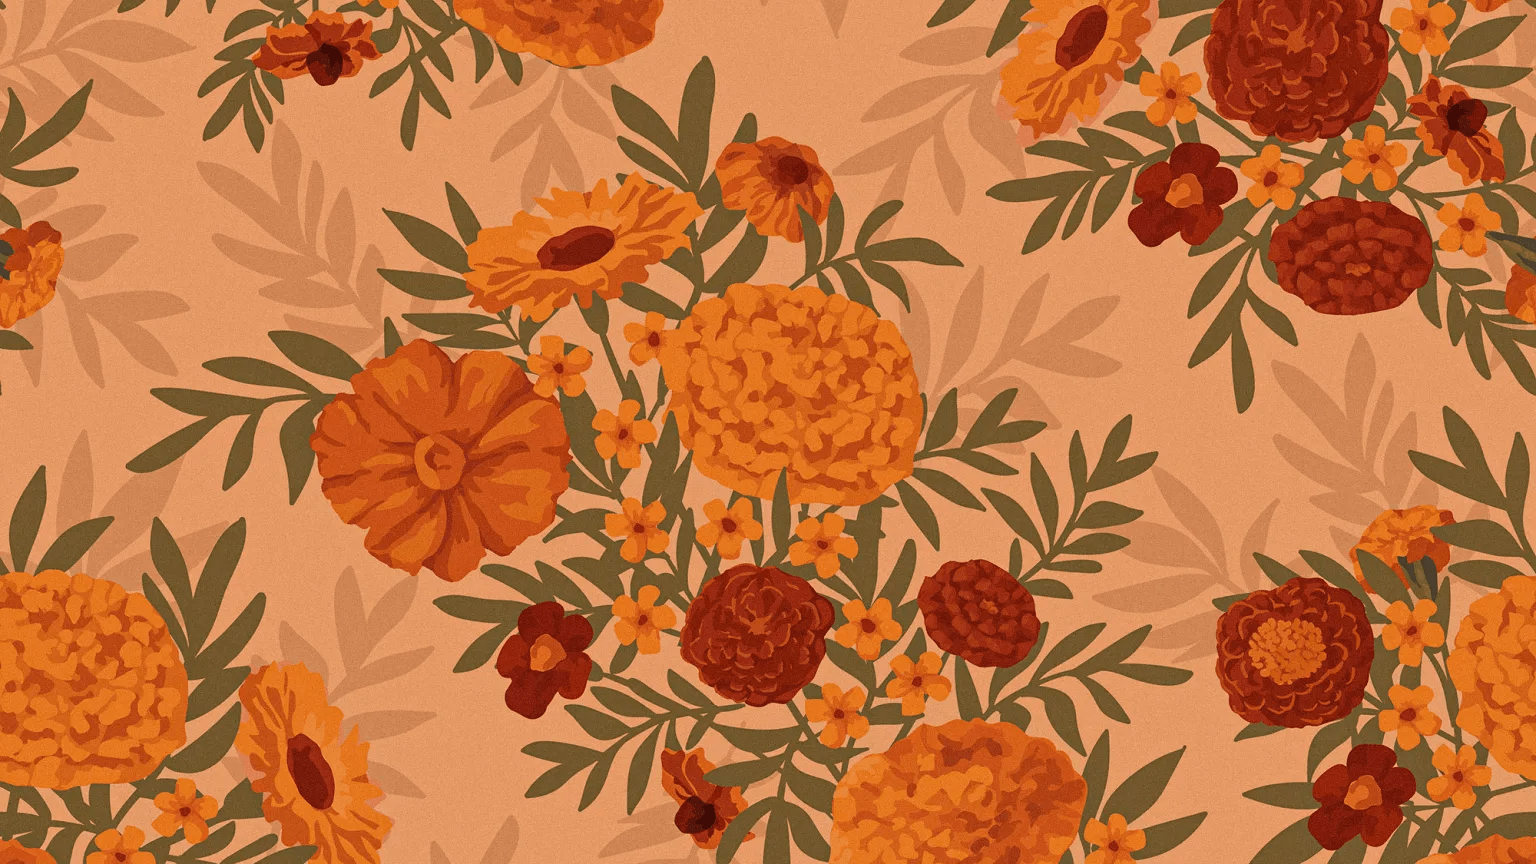 A pattern of orange and red flowers on a brown background - Computer